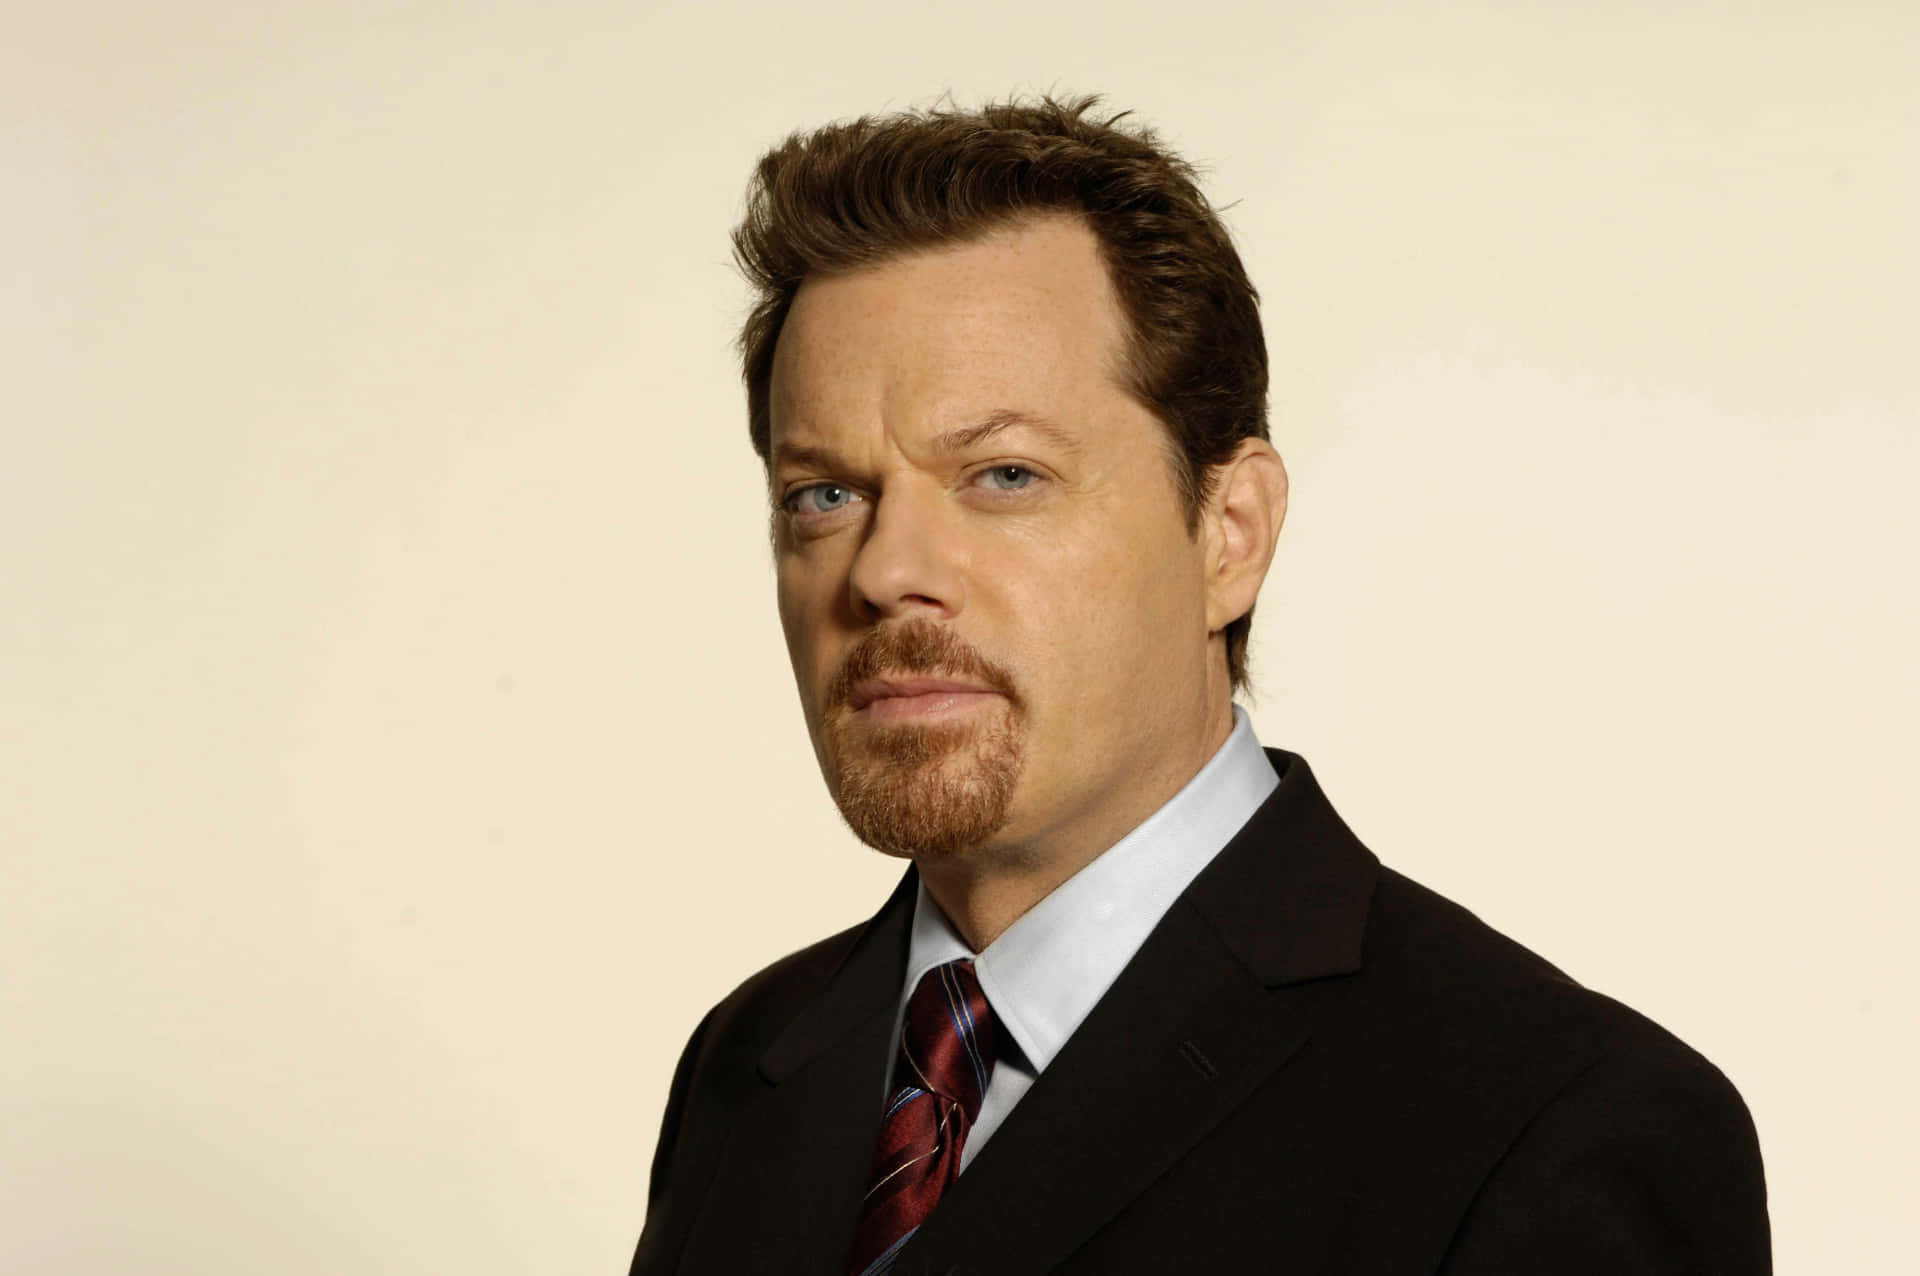 Caption: Comedian Eddie Izzard during a stand-up performance Wallpaper